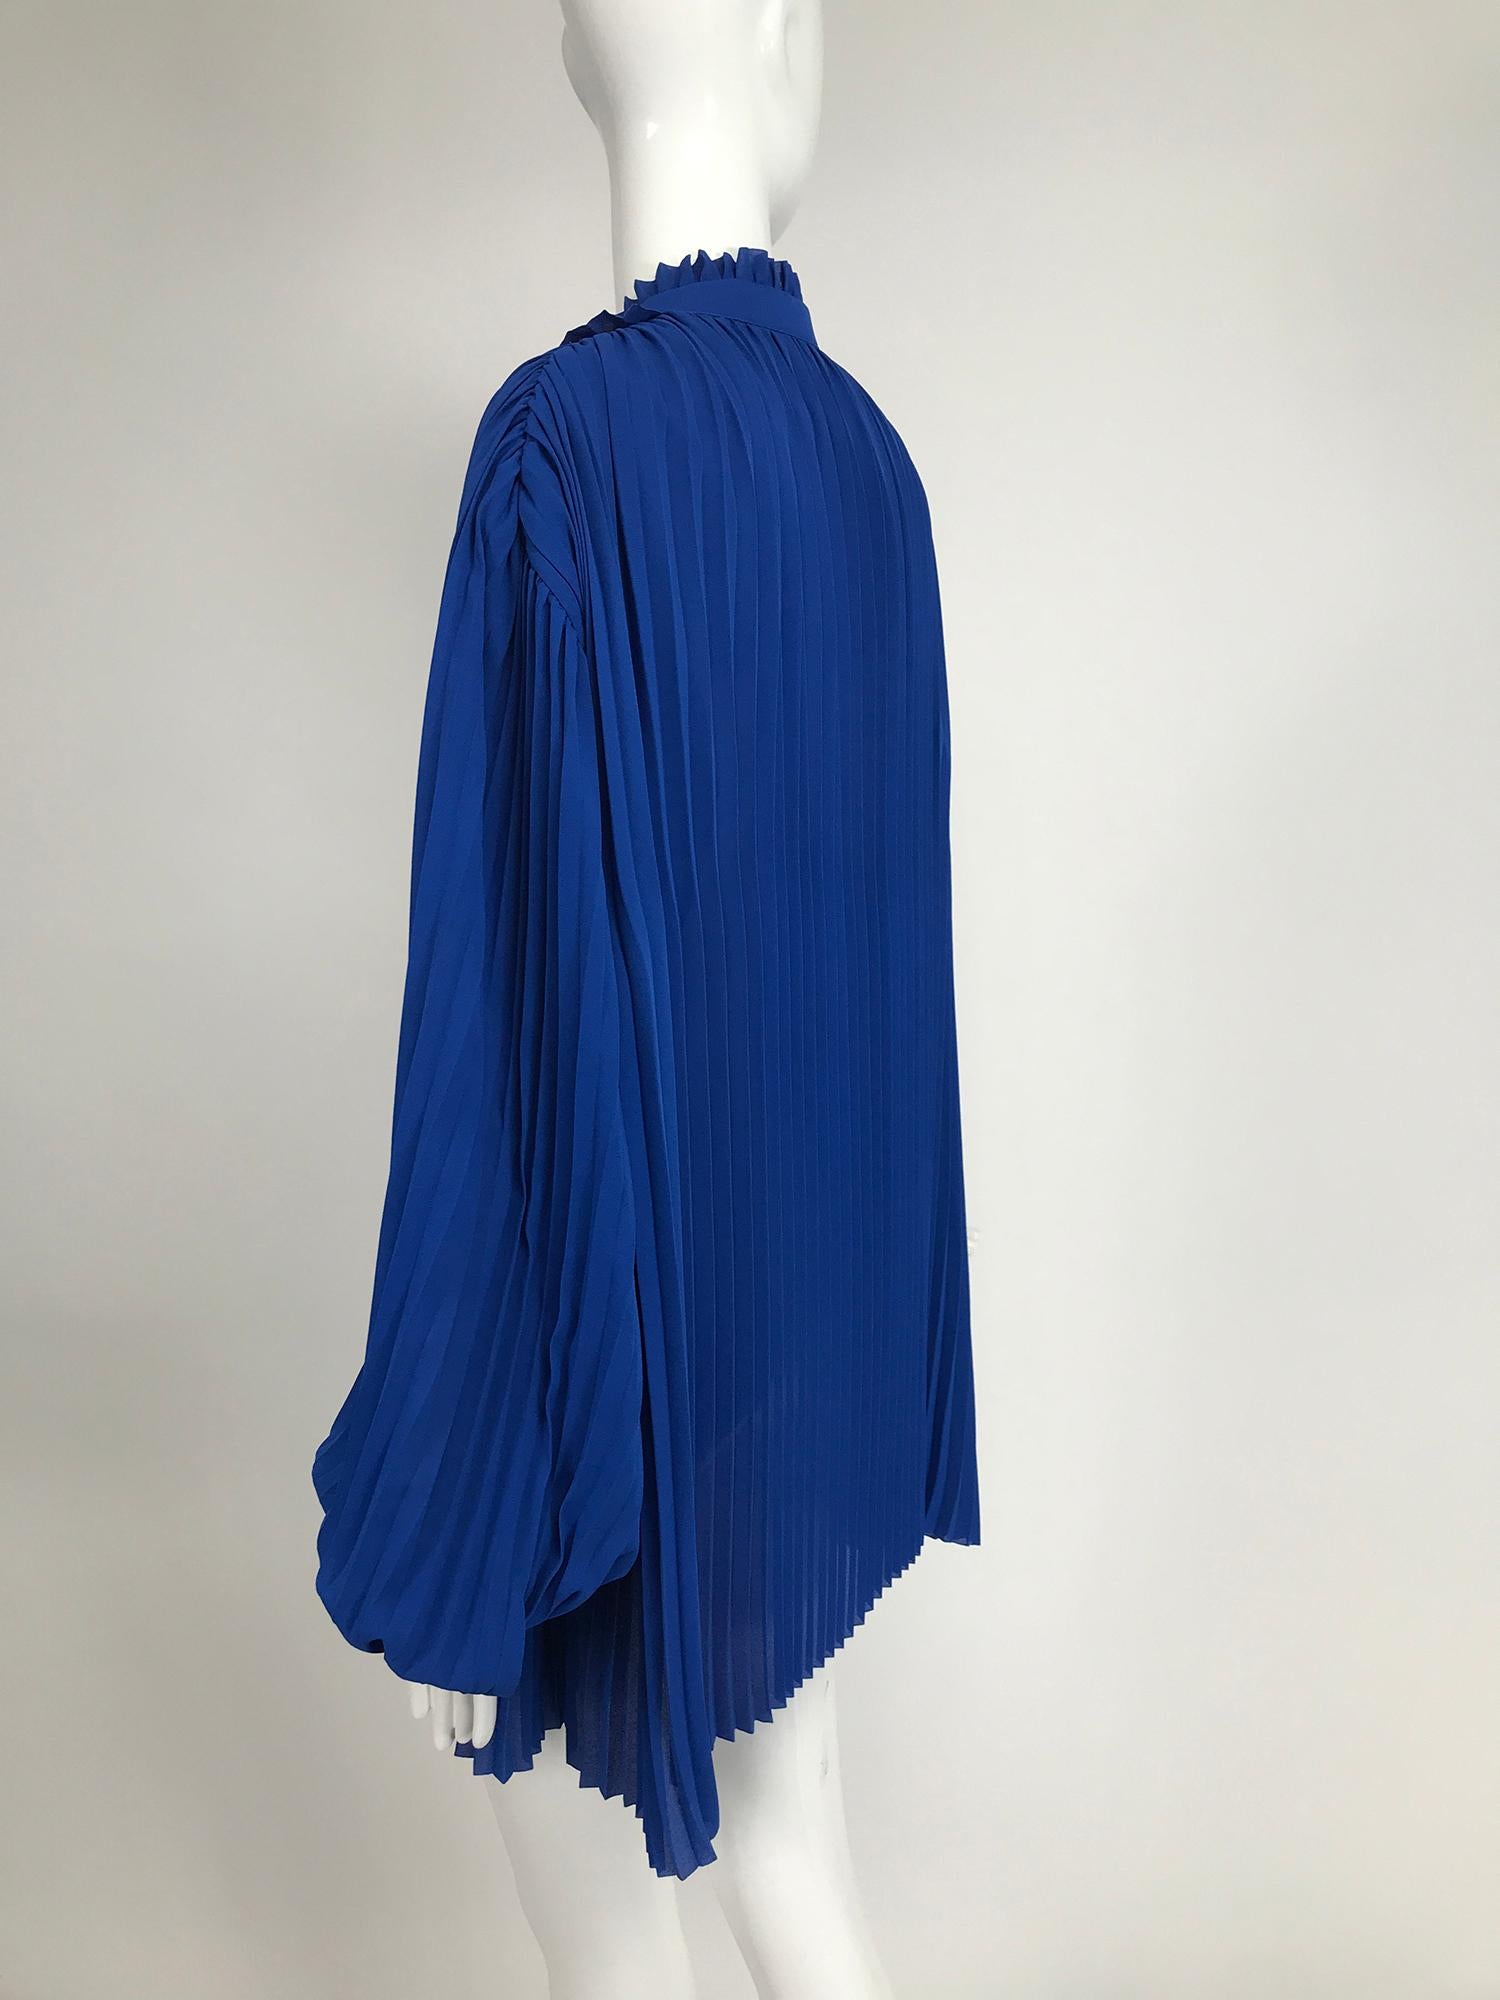 Balenciaga Resort 2017 Multi Style Royal Blue Pleated Tunic Blouse 42 In Excellent Condition In West Palm Beach, FL